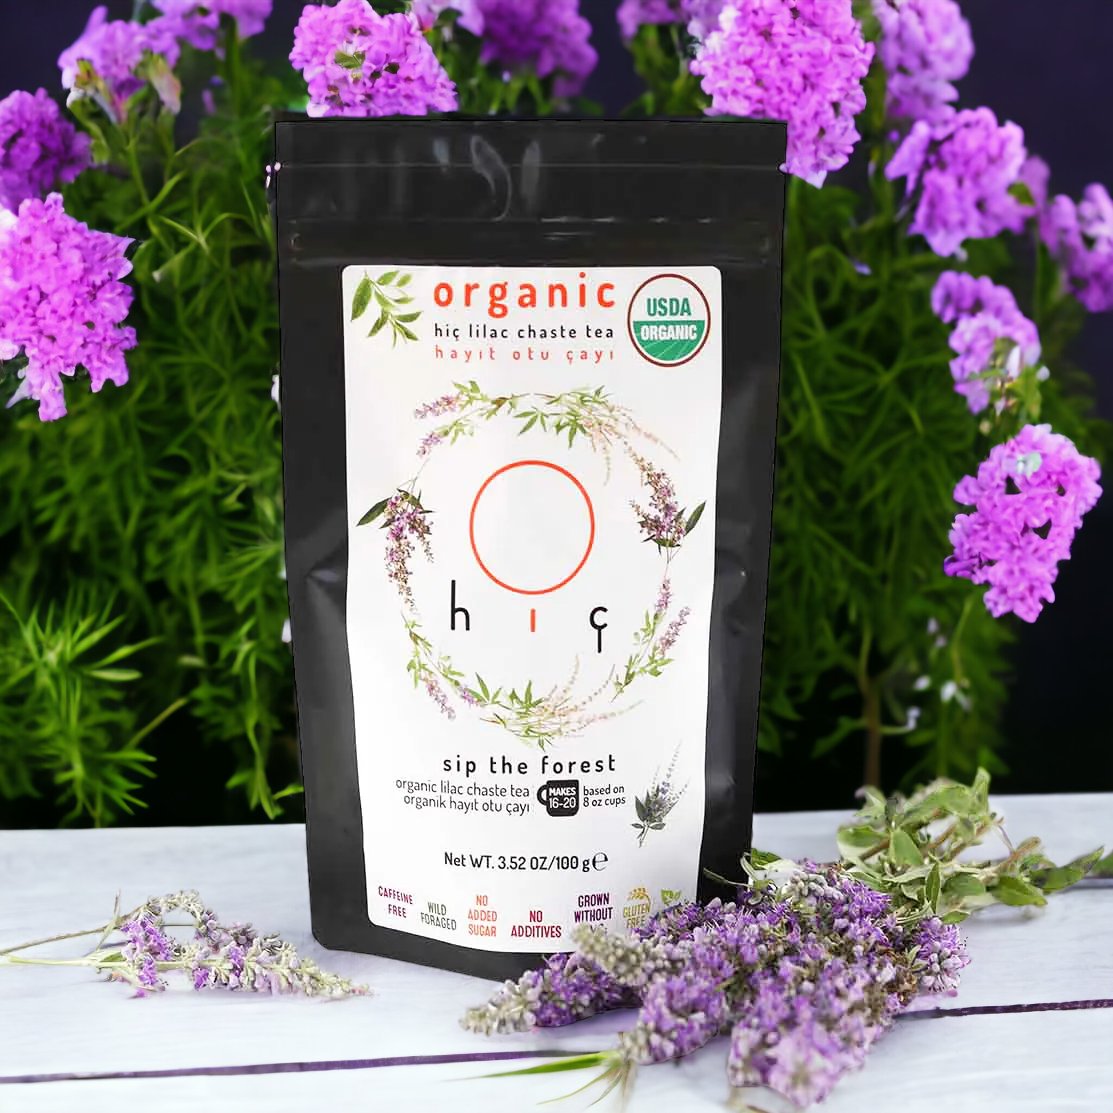 my #etsy shop: Organic Vitex agnus-castus tea is often used to support the treatment of acne,migraine and heavy menstrual periods.hormone balances in women etsy.me/444nEiV #no #organicingredients #organicherbaltea #natural #organic #tea #OrganicHerbalTea
#HerbalInfusion